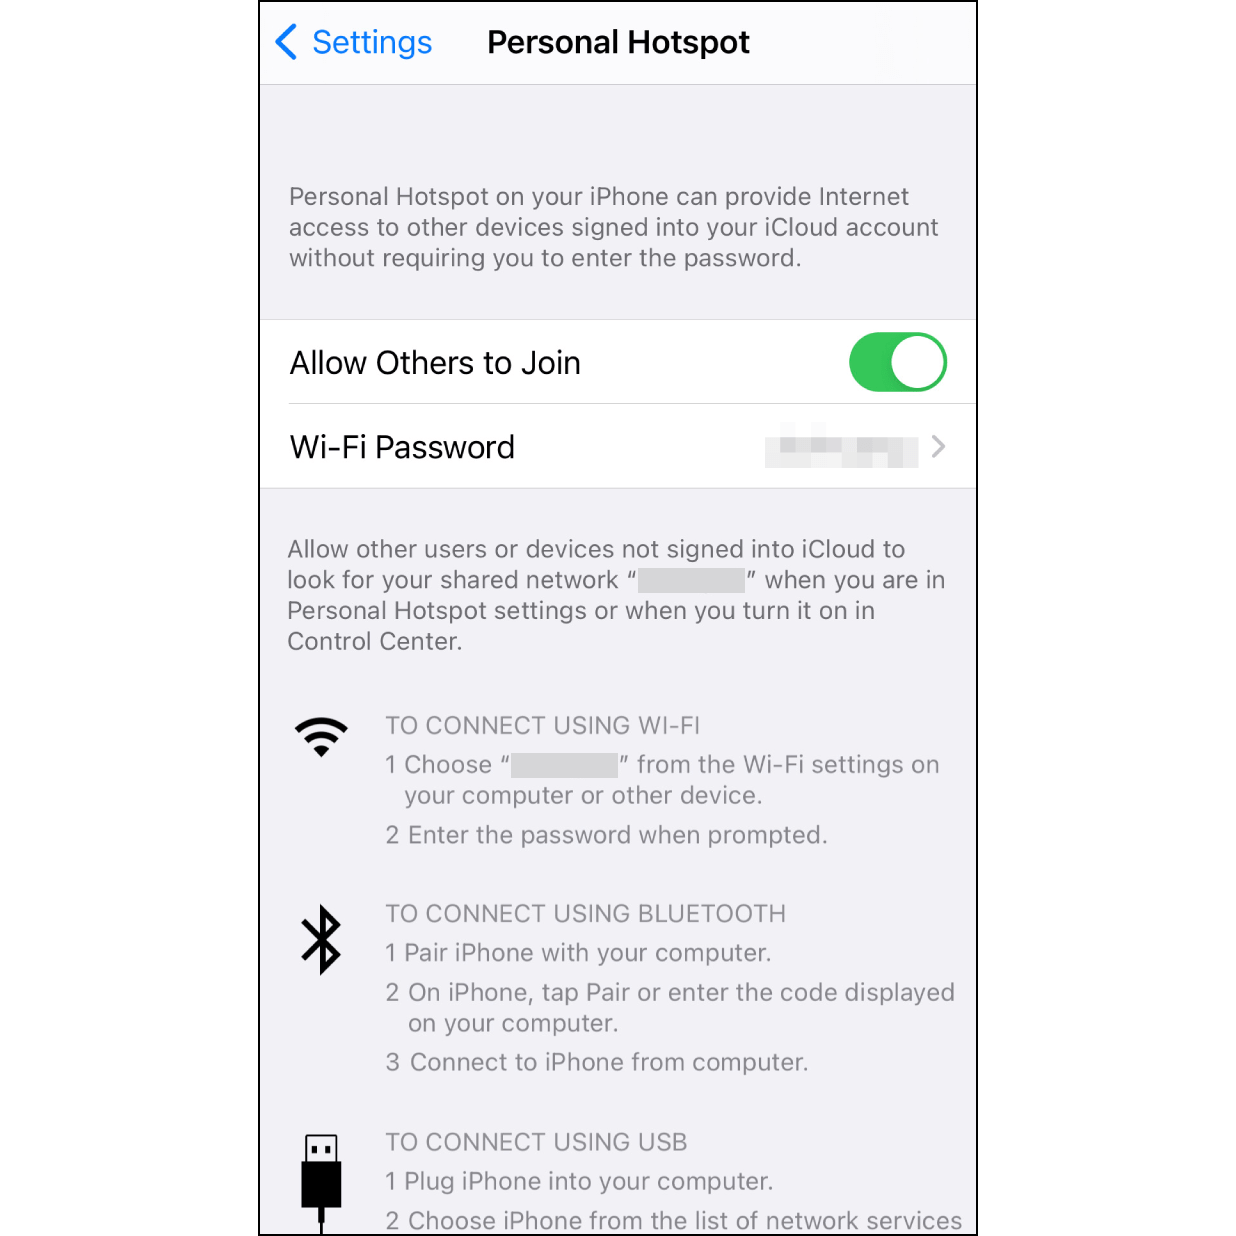 9. Turn on Personal HotspotGo to iPhone “Settings” and turn on hotspot (navigate to the “Settings Page” > “Hotspot” and turn on hotspot).